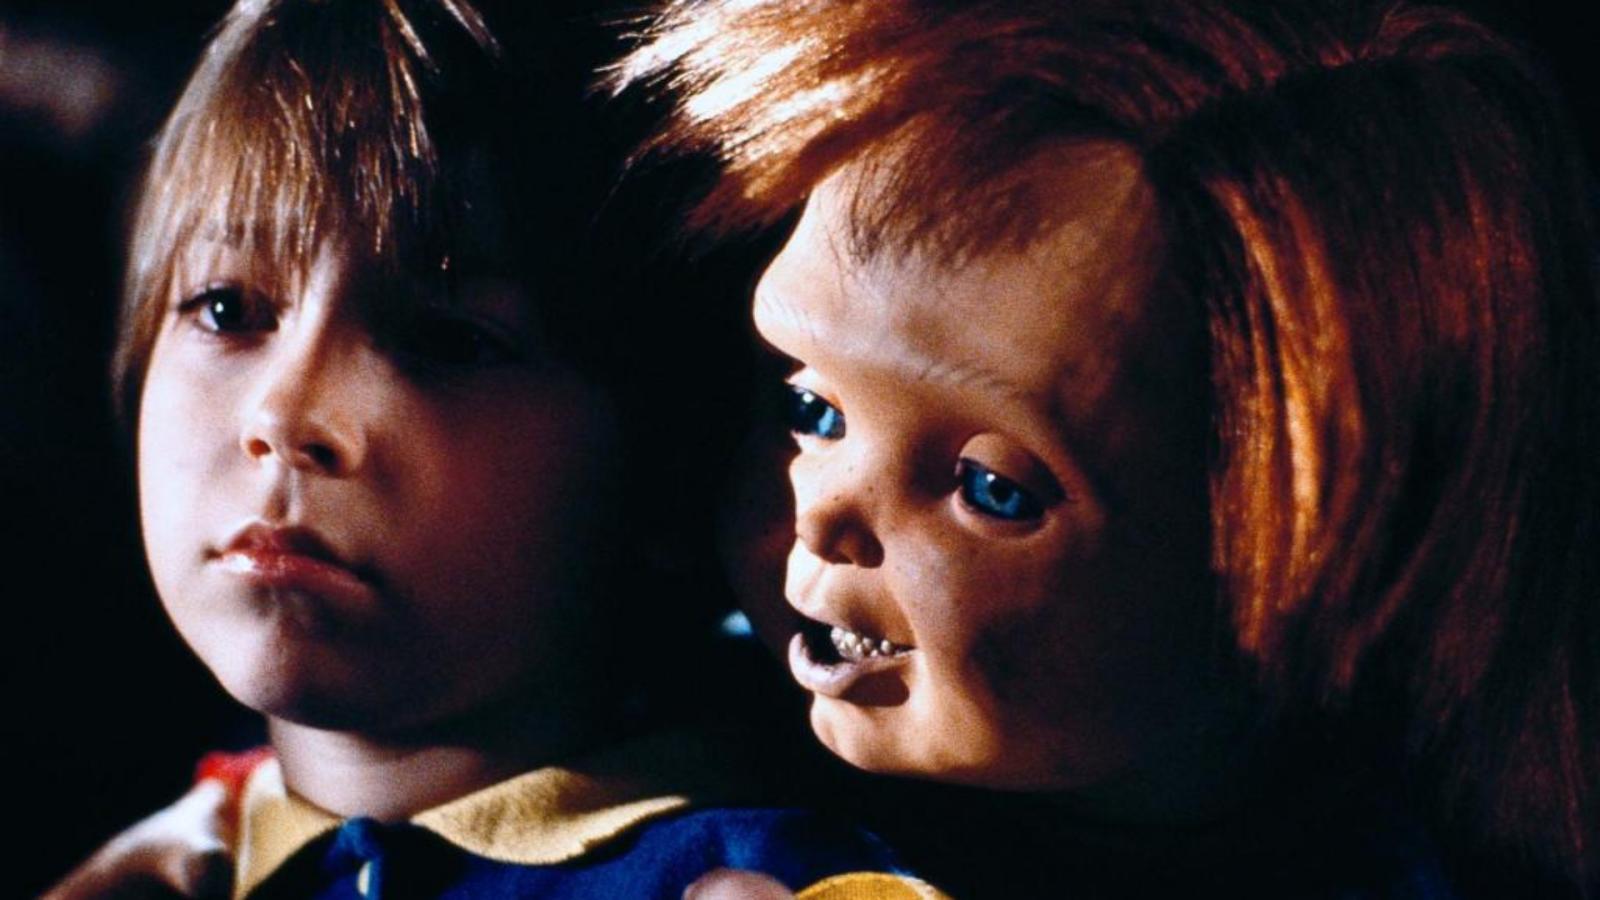 15 Horror Movies From the 80s That Still Hold Up Today - image 11